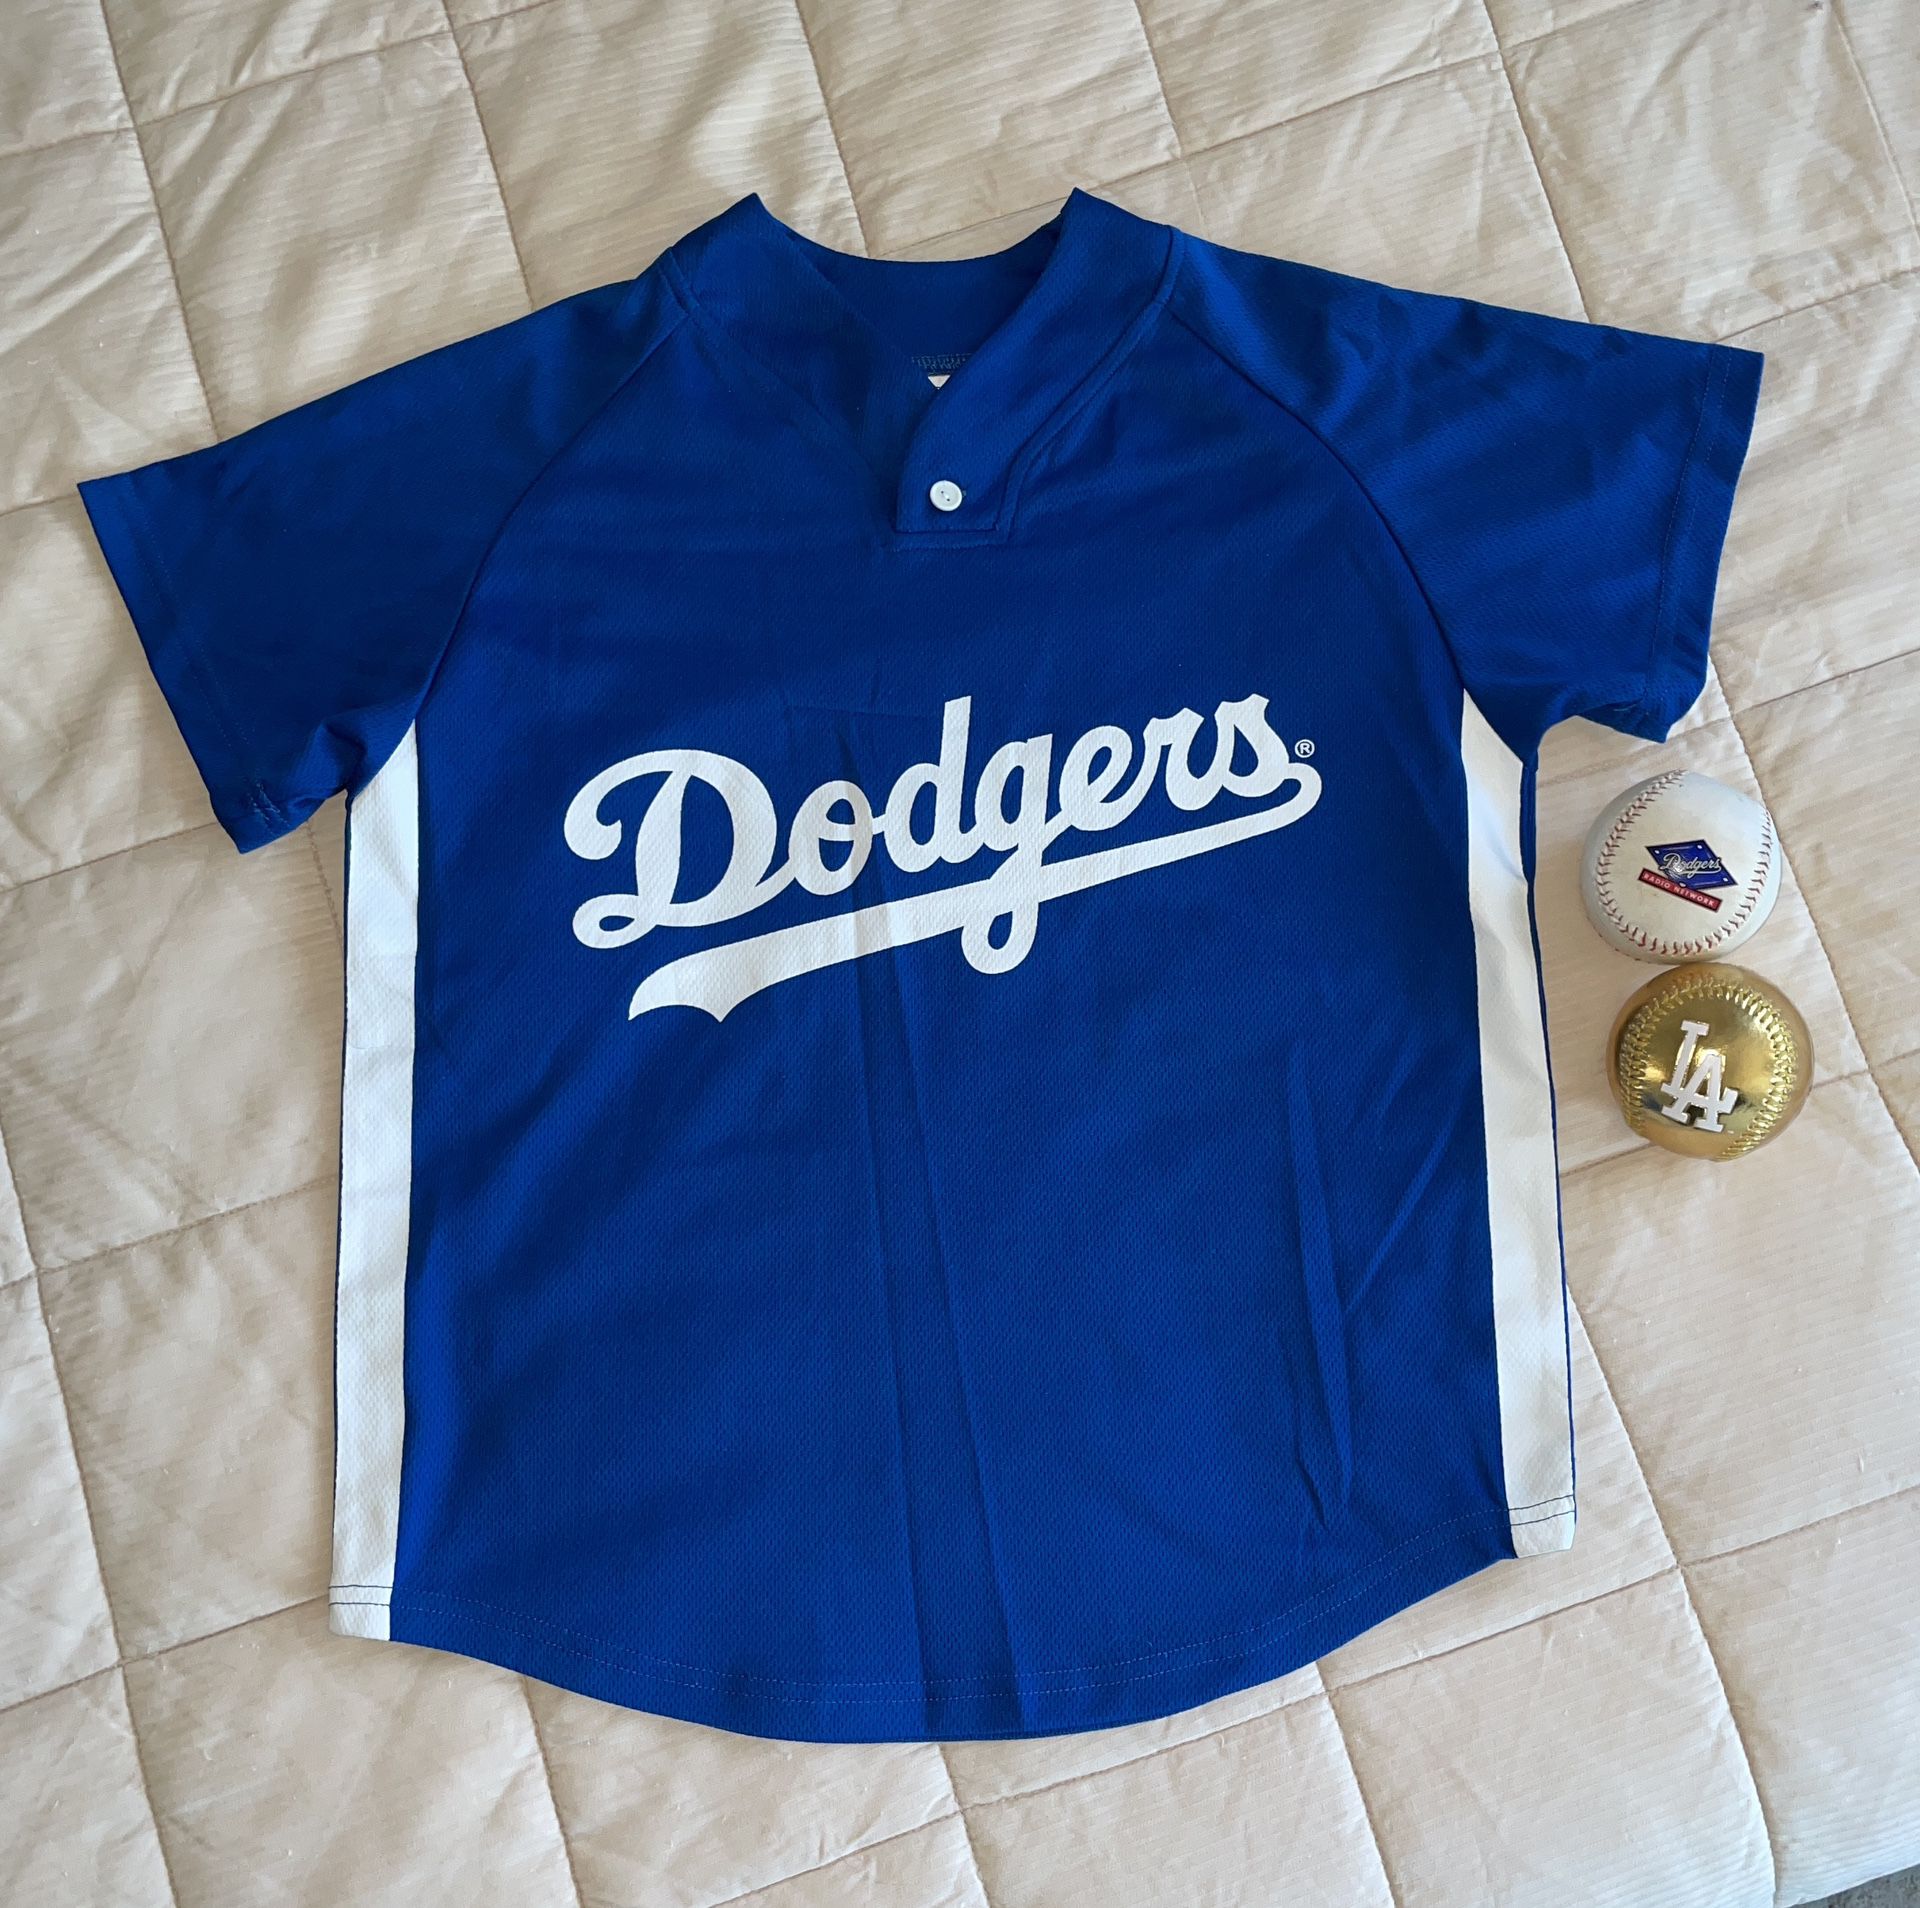 Dodgers Youth Jersey James Loney #7 for Sale in Los Angeles, CA - OfferUp